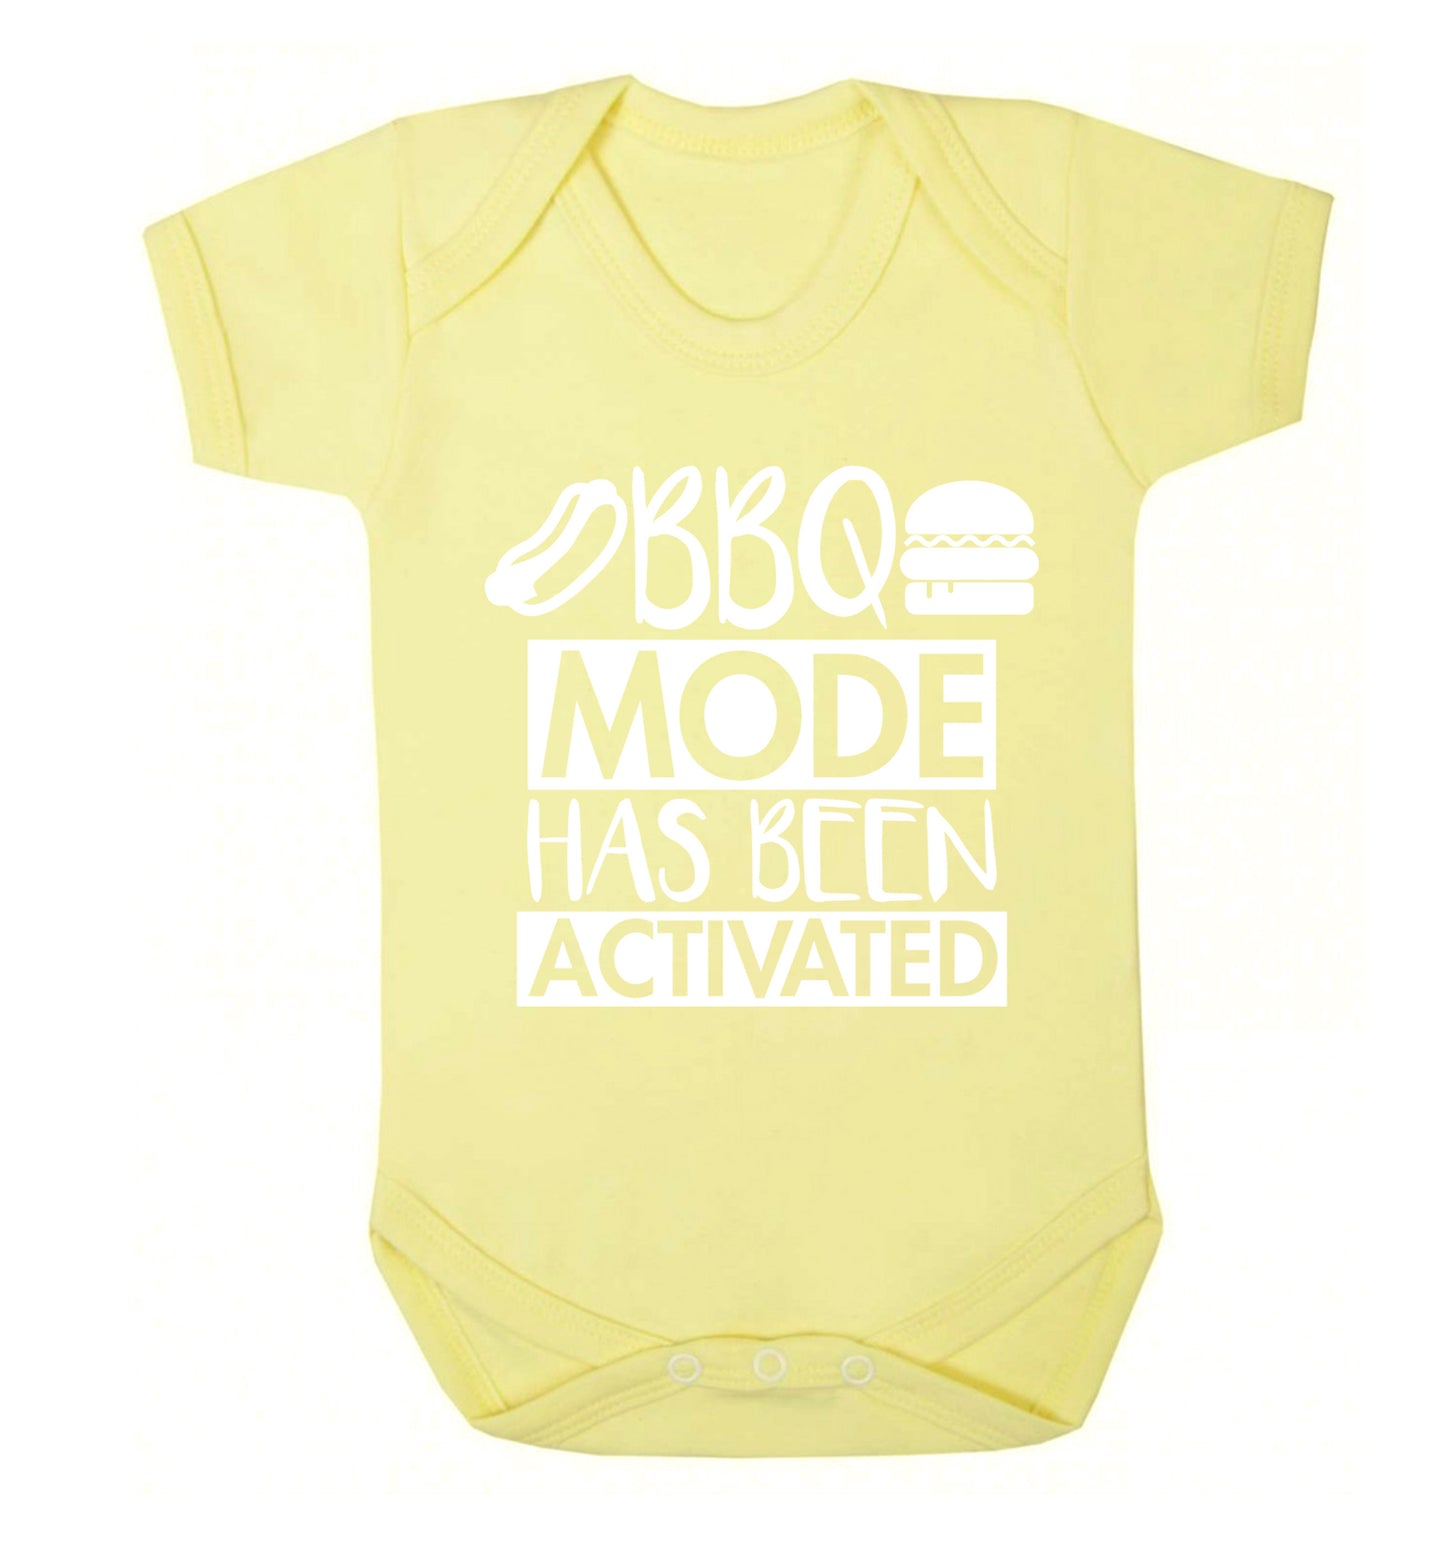 Bbq mode has been activated Baby Vest pale yellow 18-24 months